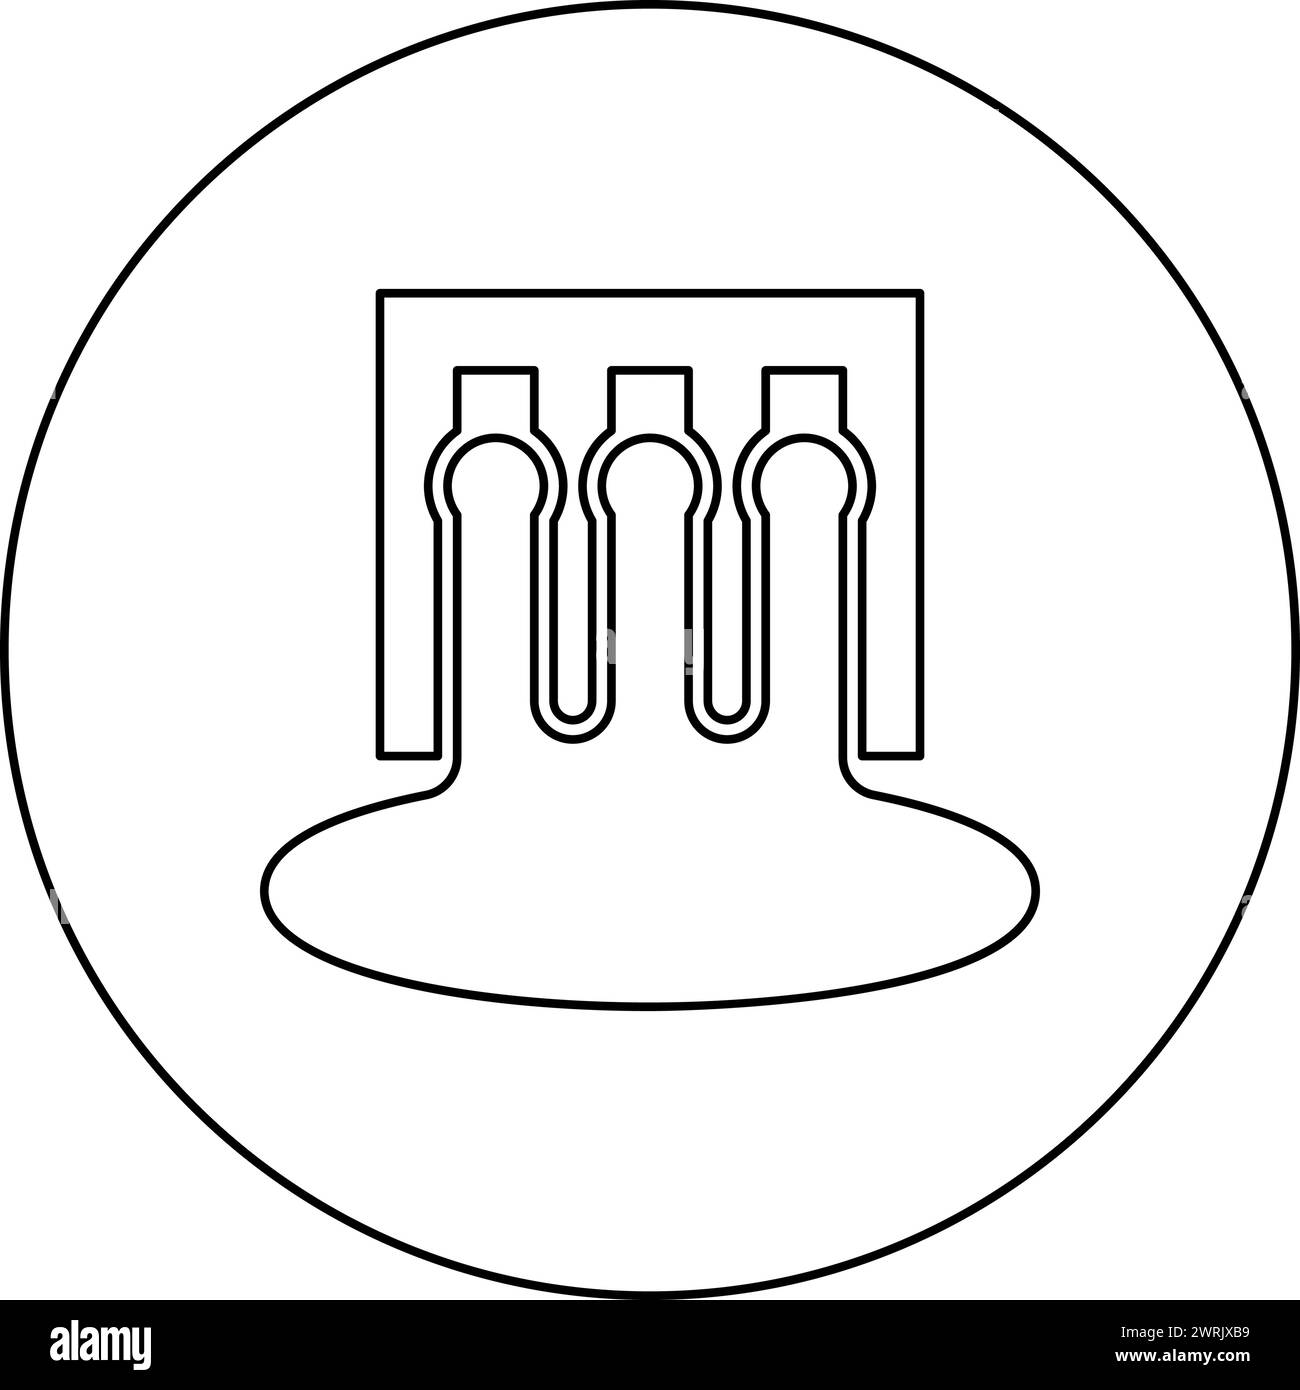 Hydro dam hydroelectric water power station hydropower energy technology plant powerhouse icon in circle round black color vector illustration image Stock Vector